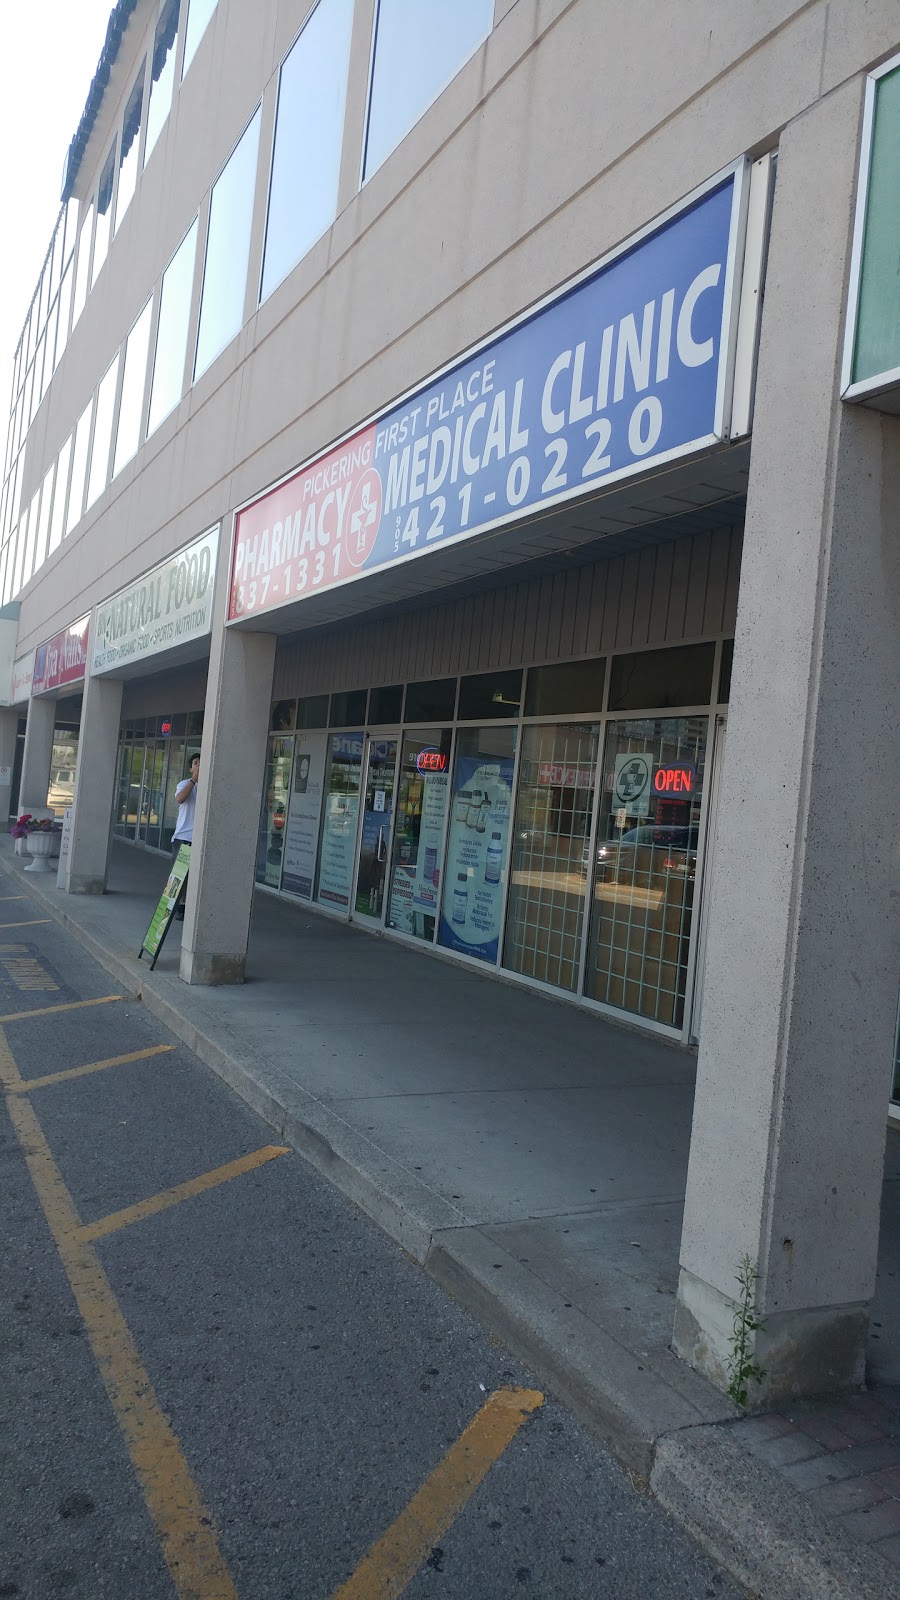 Pickering First Place Pharmacy | 1550 Kingston Rd Unit 11, Pickering, ON L1V 1C3, Canada | Phone: (905) 837-1331